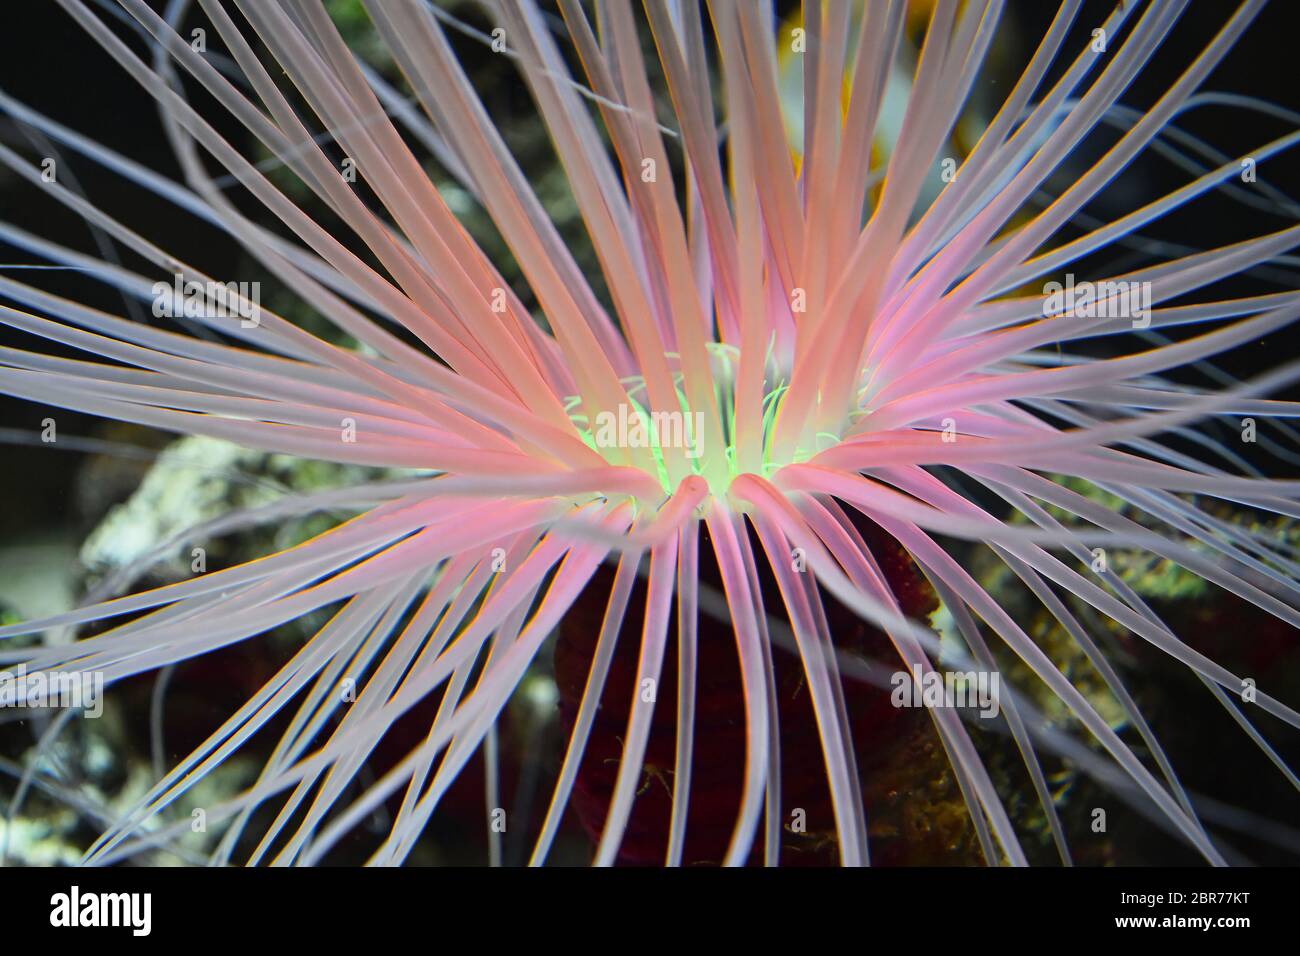 Close up pink and purple sea sebae anemone polyps in water of aquarium, high angle view Stock Photo